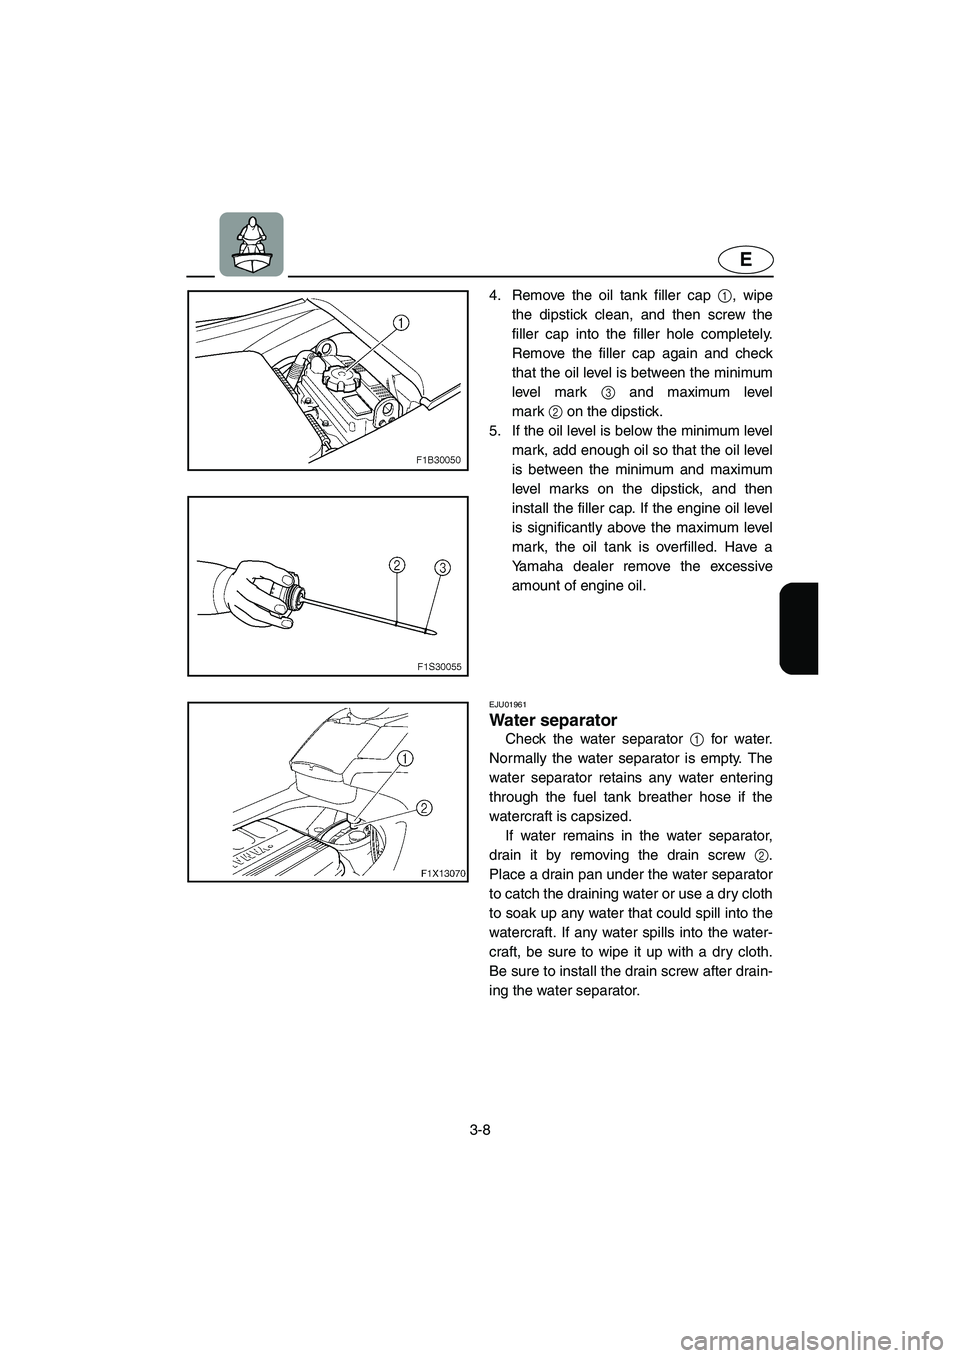 YAMAHA FX 2006  Owners Manual 3-8
E
4. Remove the oil tank filler cap 1, wipe
the dipstick clean, and then screw the
filler cap into the filler hole completely.
Remove the filler cap again and check
that the oil level is between t